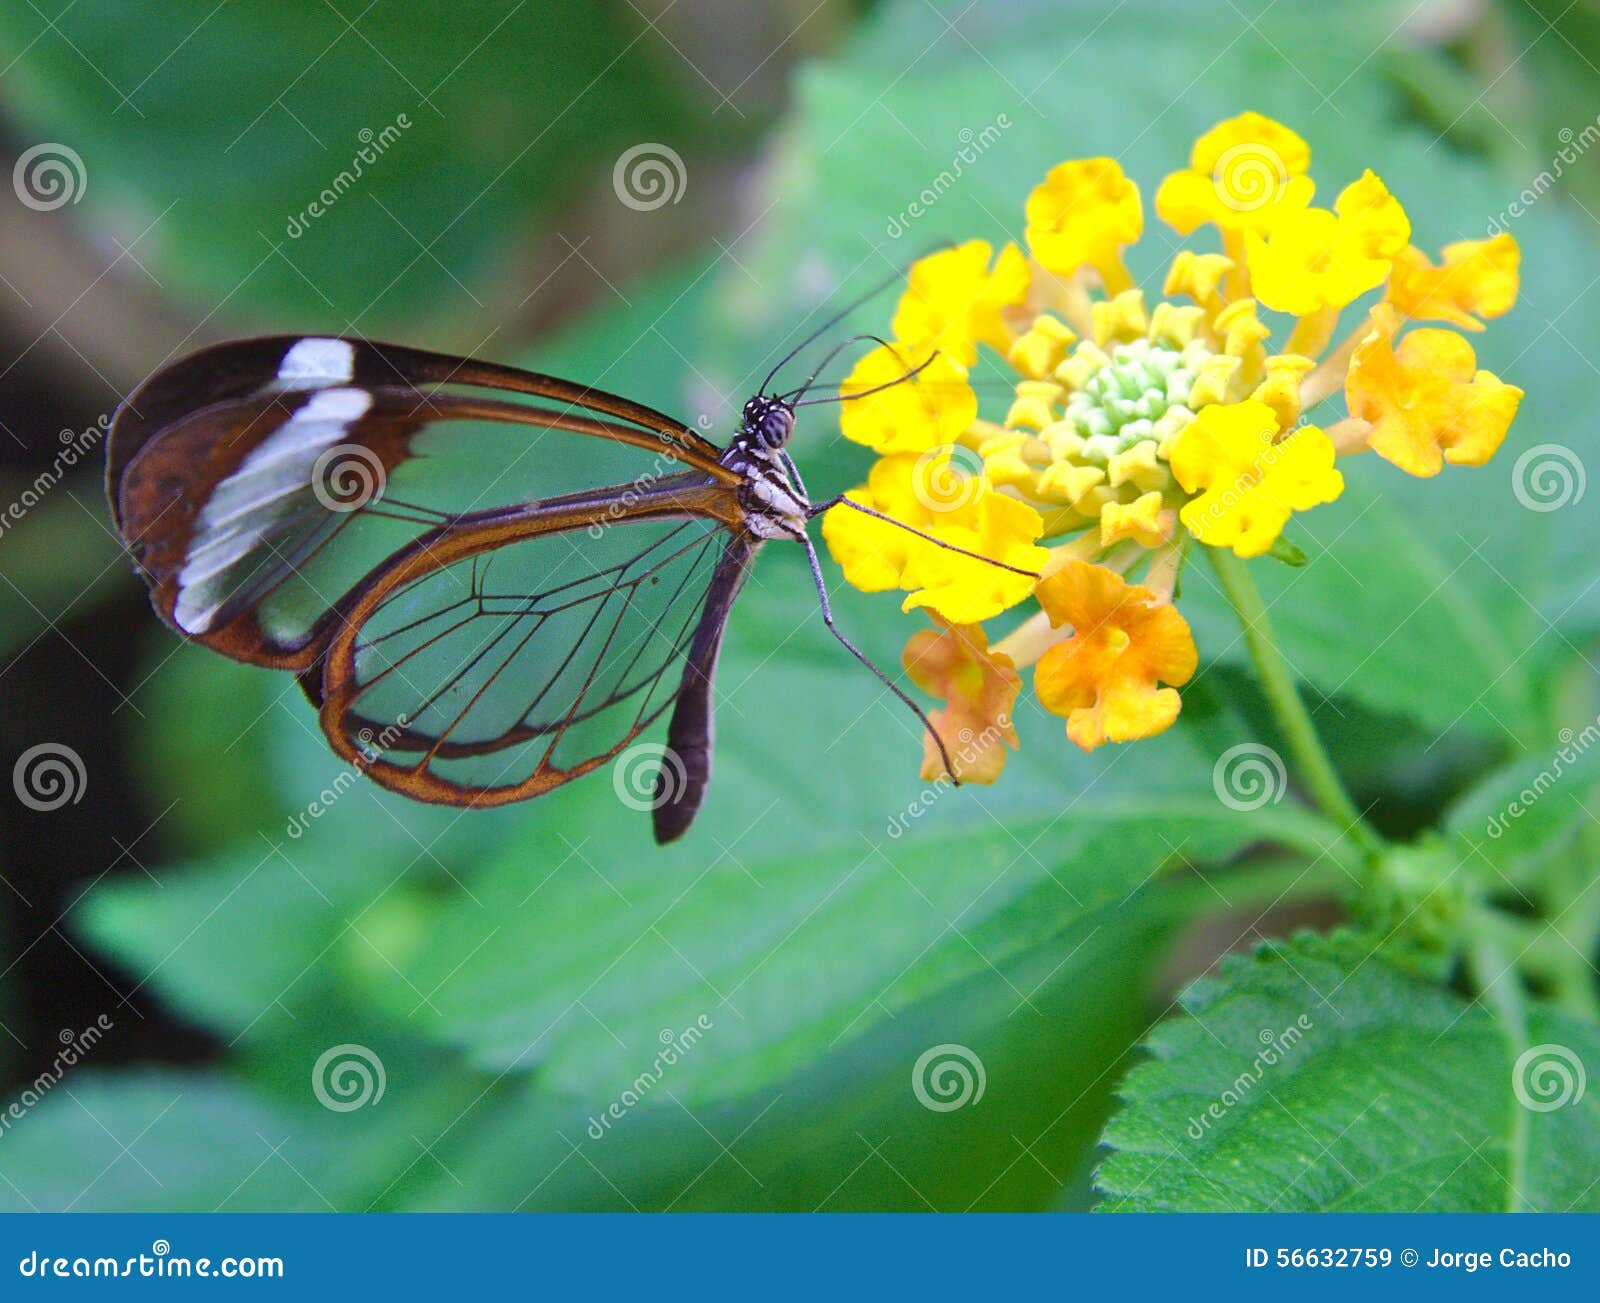 greta oto butterfly with transparent wings feeds